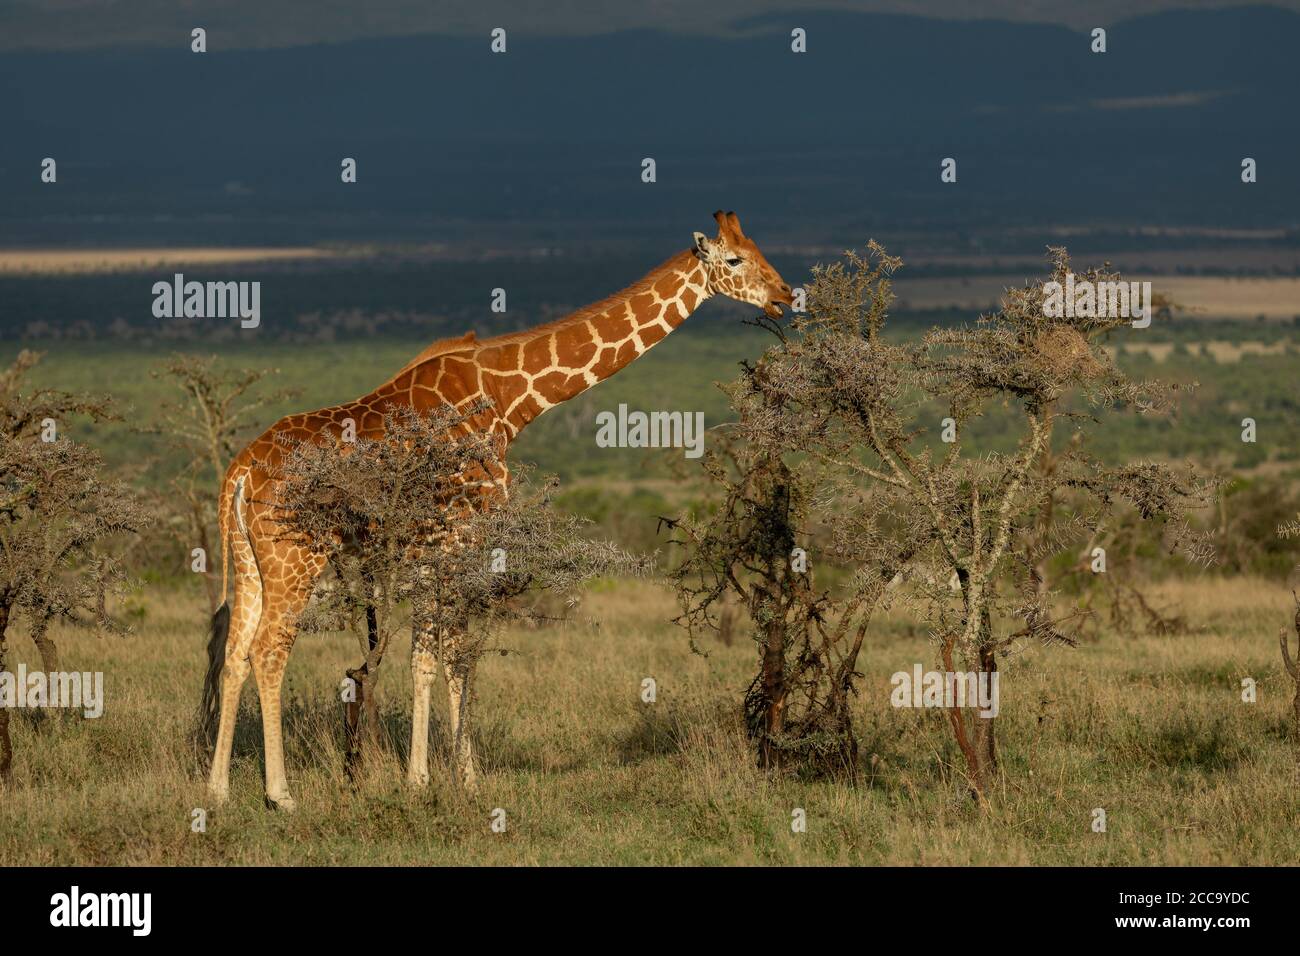 Adult reticulated giraffe eating from an acacia bush with dark blue stormy background in Ol Pajeta in Kenya Stock Photo